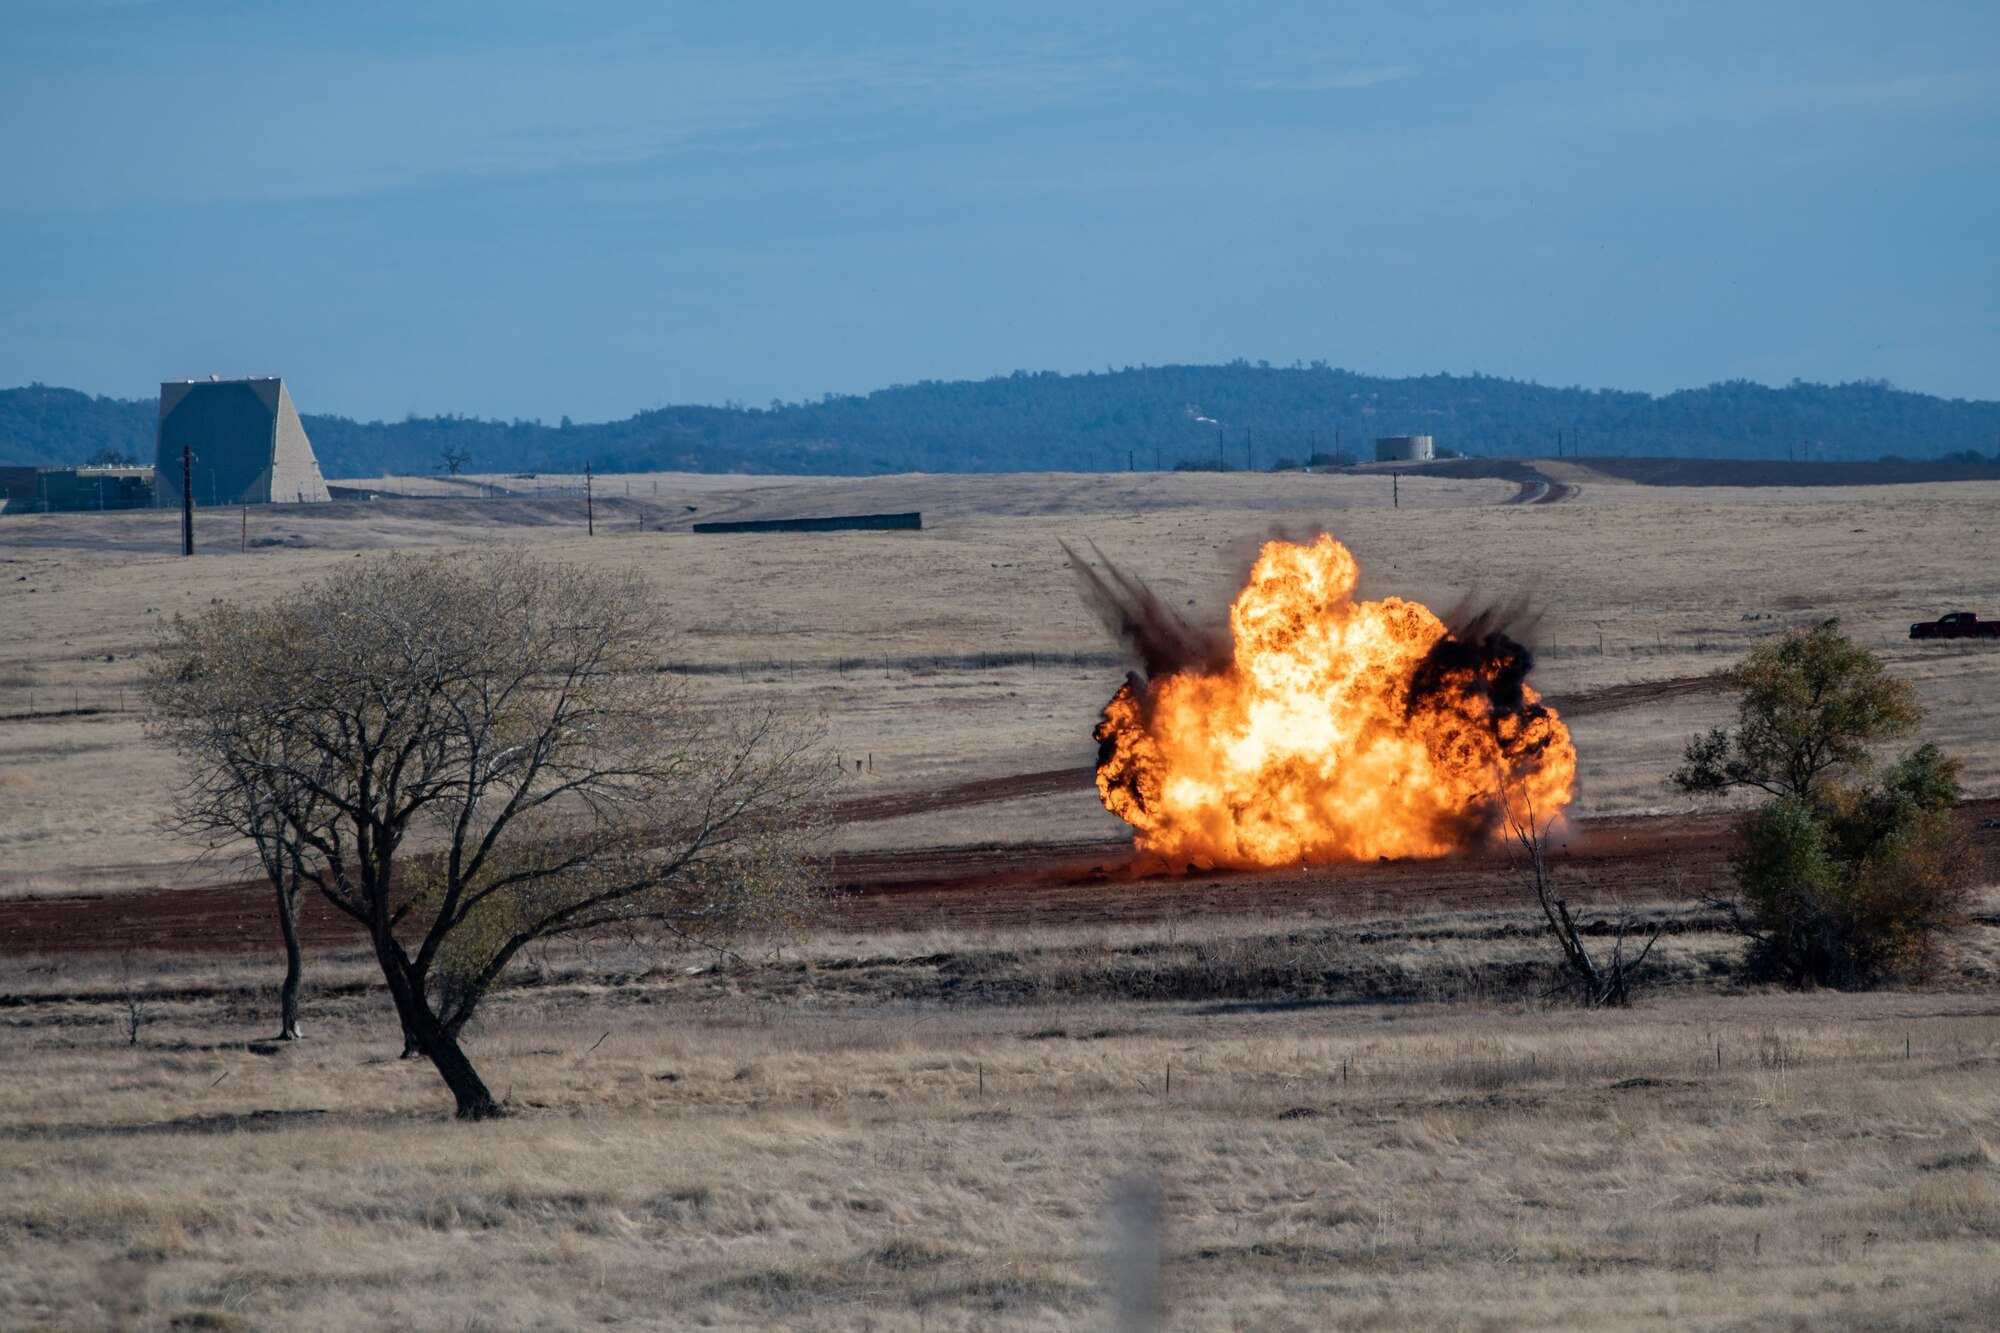 Explosives, equivalent to 100 pounds of TNT, are set off during military working dog (MWD) and explosive ordnance detection collaborated training on Beale Air Force Base.